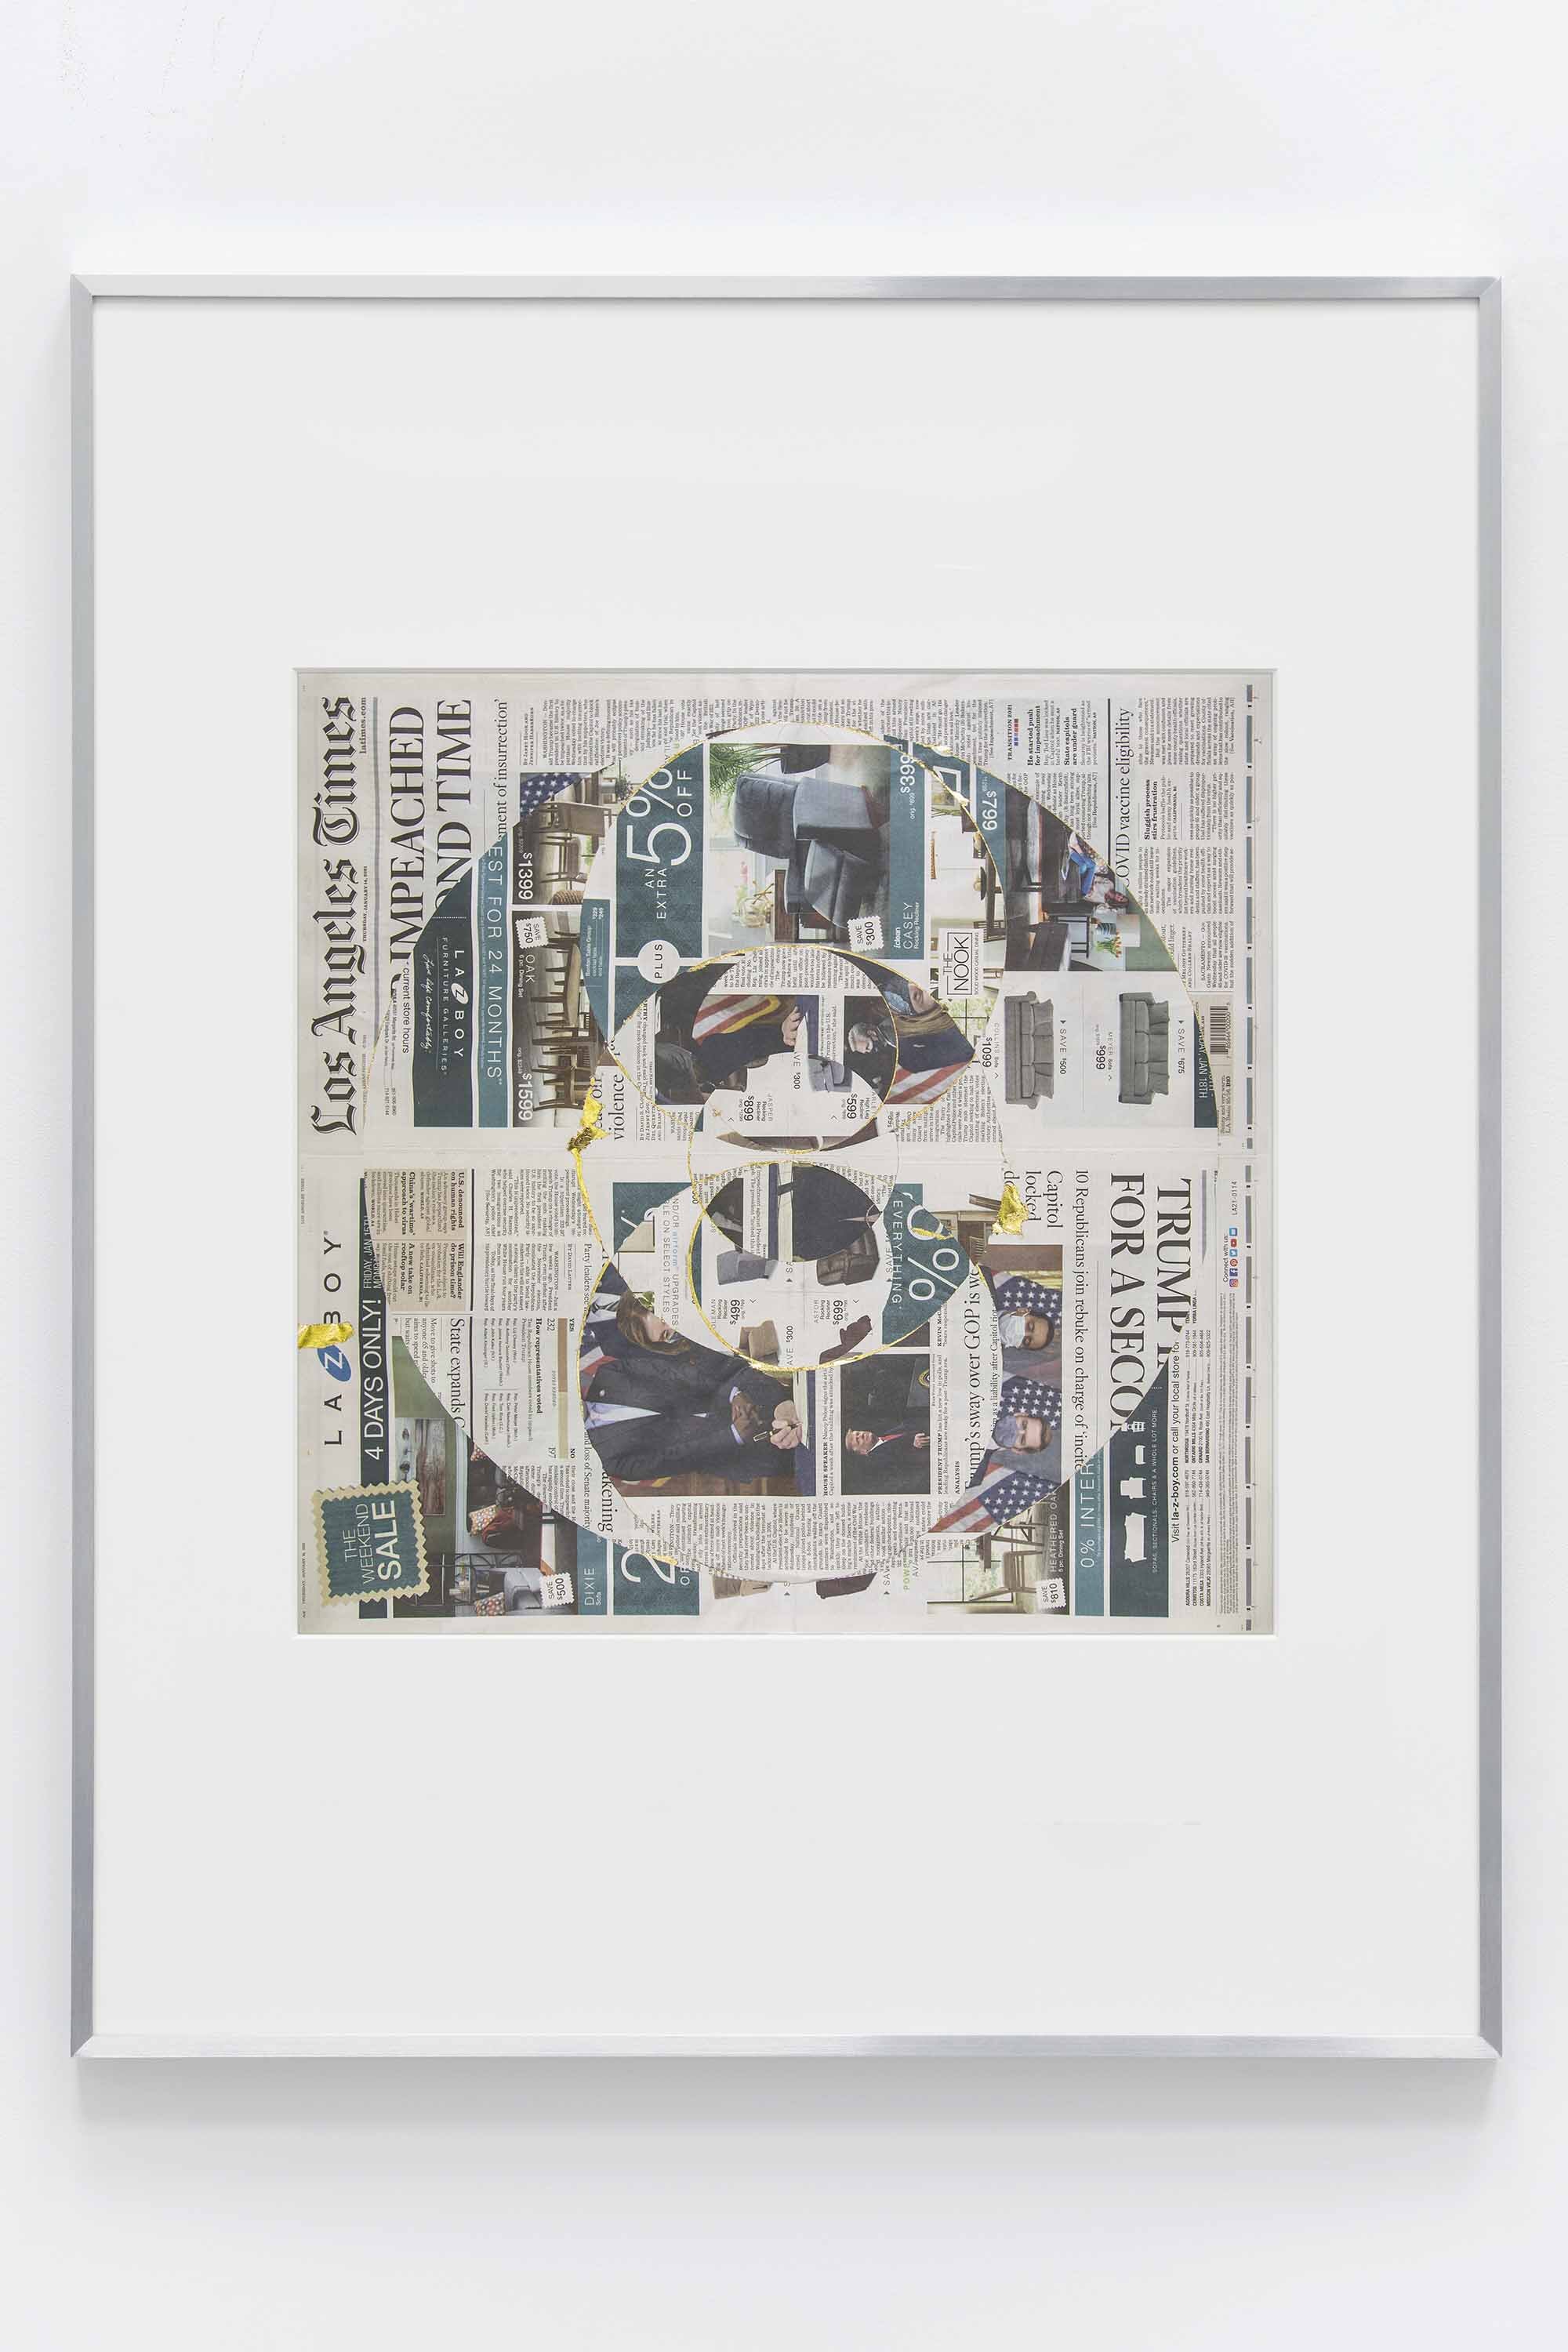   Blind Collage (Seven 180º Rotations, Los Angeles Times: Los Angeles, California, Thursday, January 14, 2021)    2021   Newspaper, tape, and 22 karat gold leaf  39 1/8 x 31 1/4 inches  Exhibition:   Foreign Correspondence, 2021  